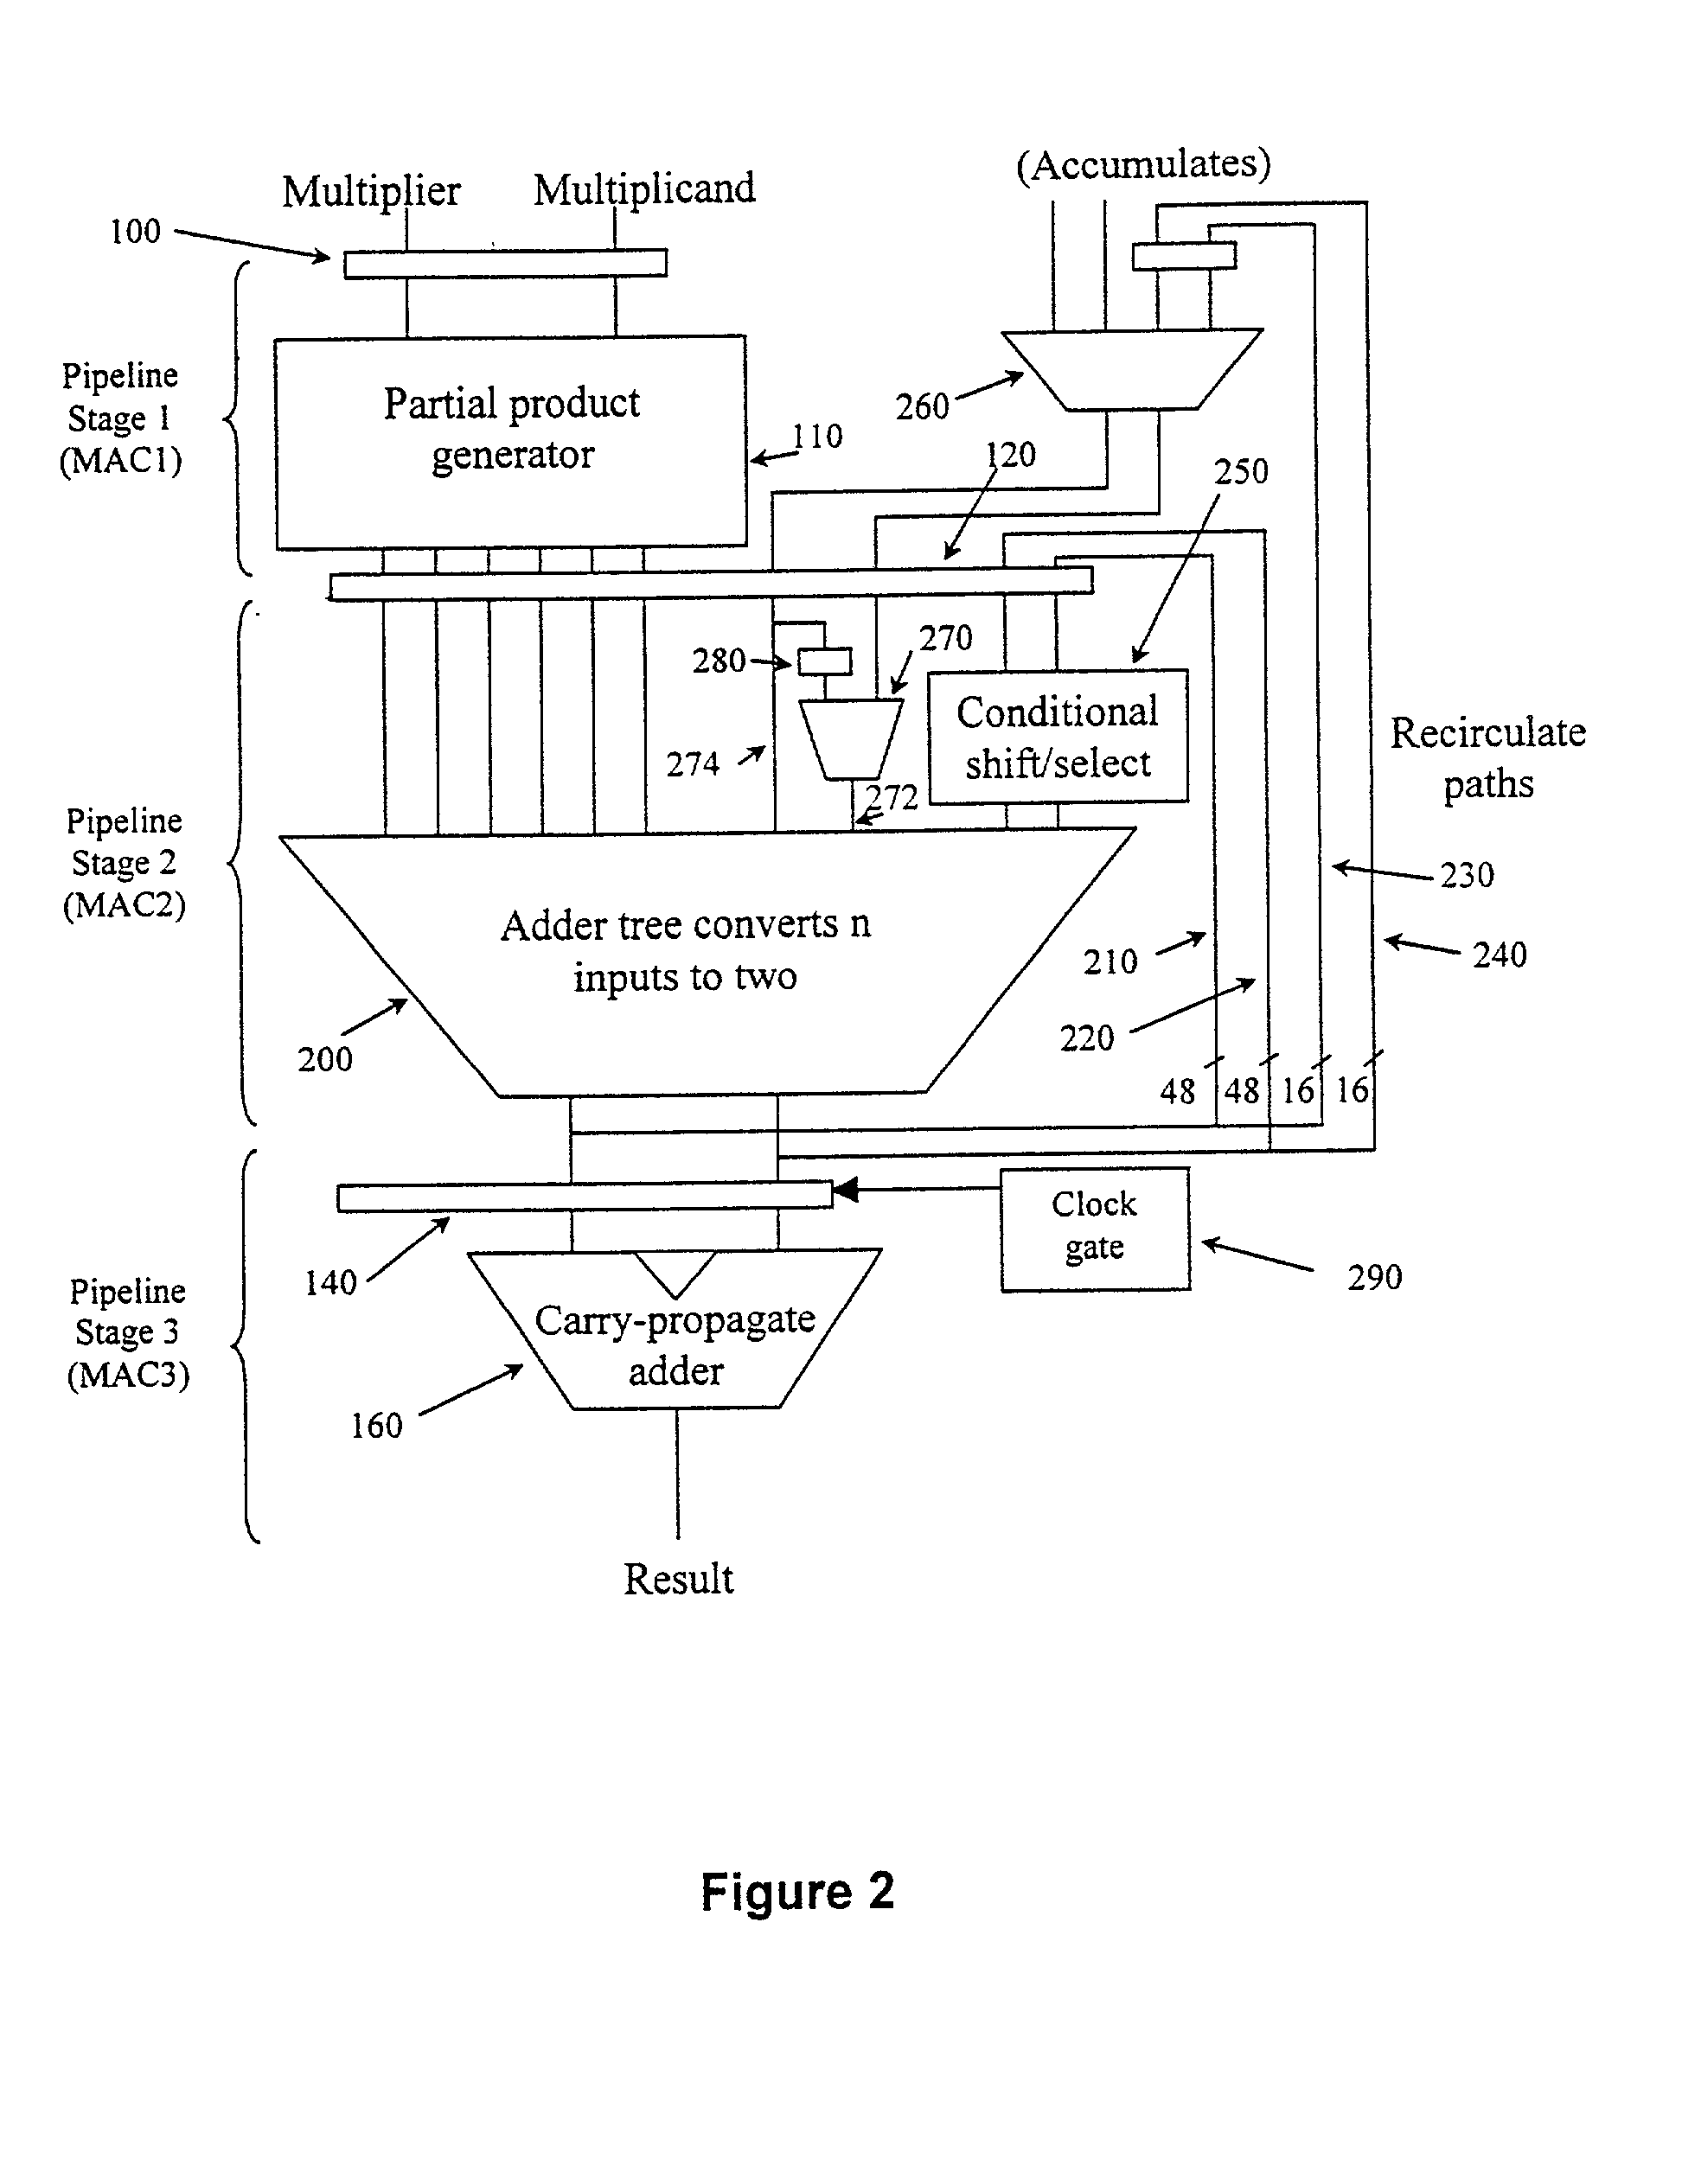 Apparatus and method for performing multiplication operations